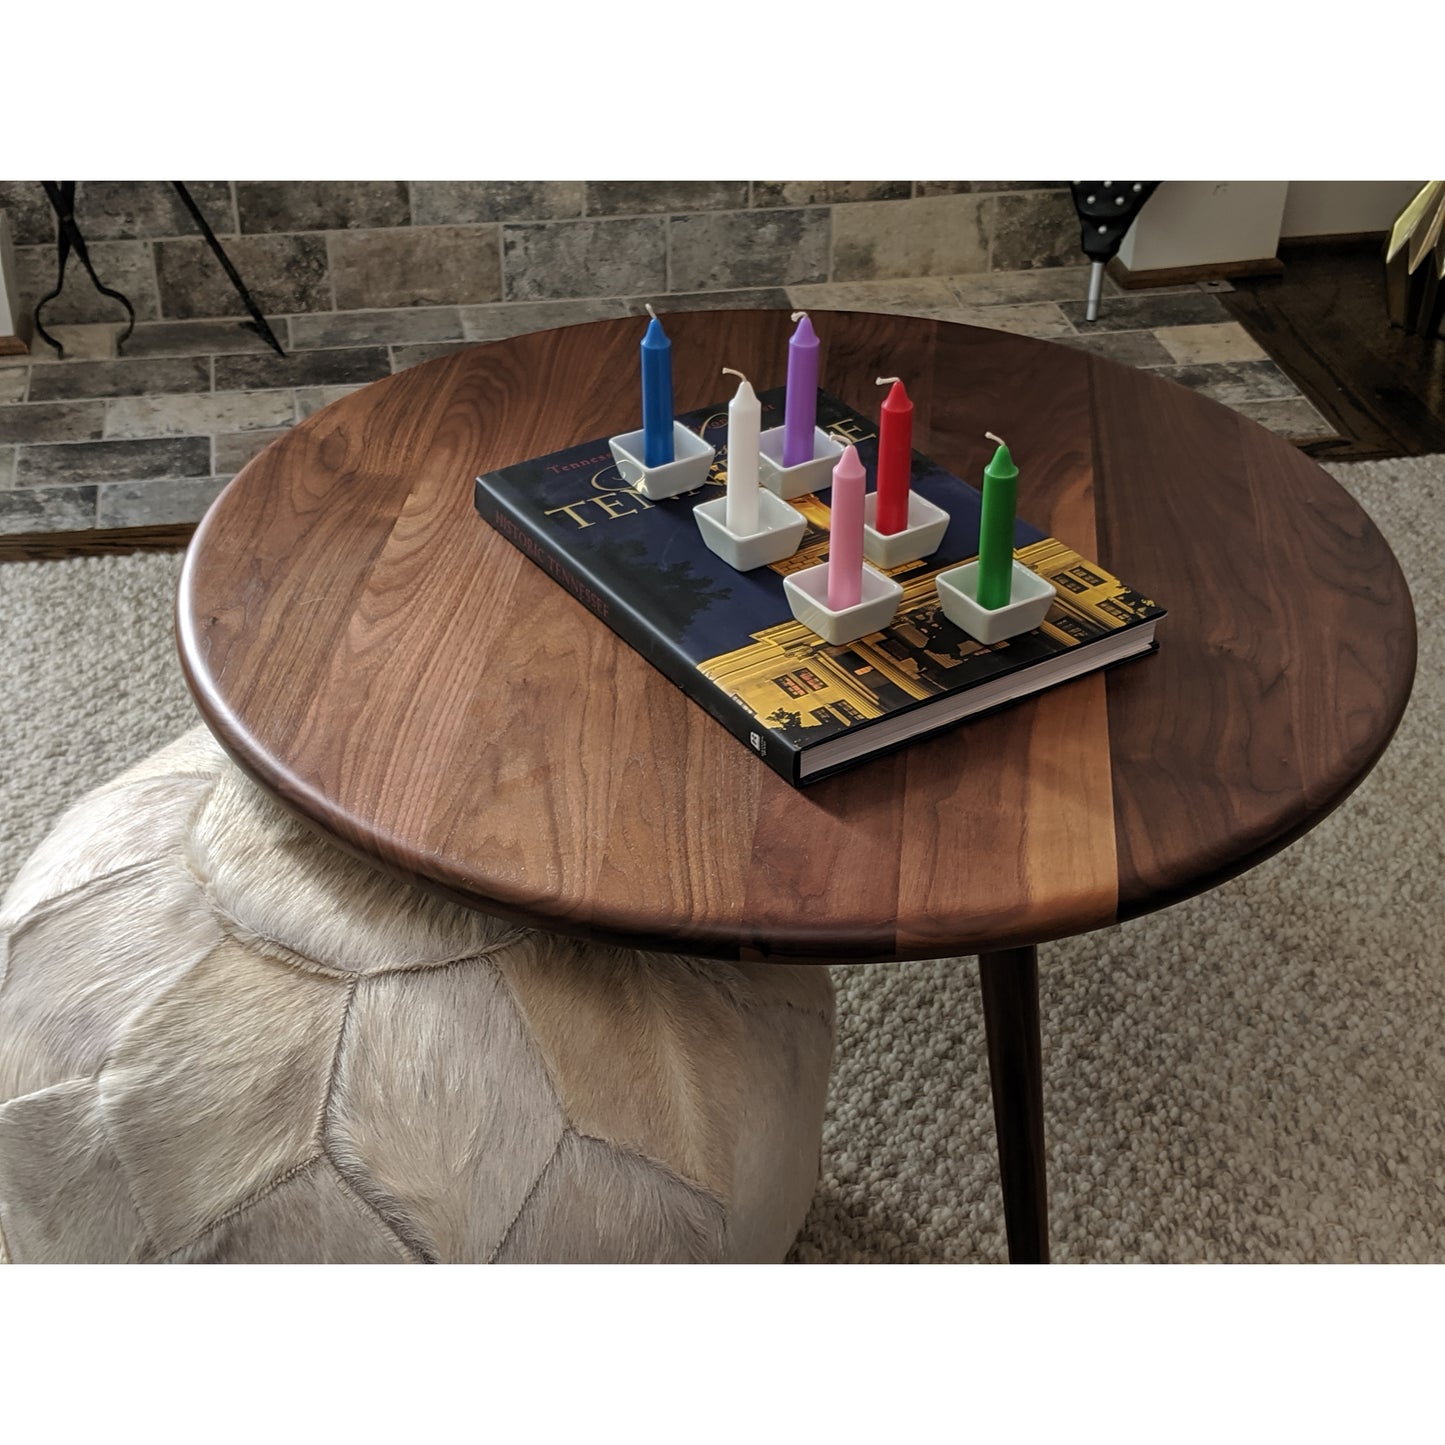 Image, multi colored candles displayed on coffee table.